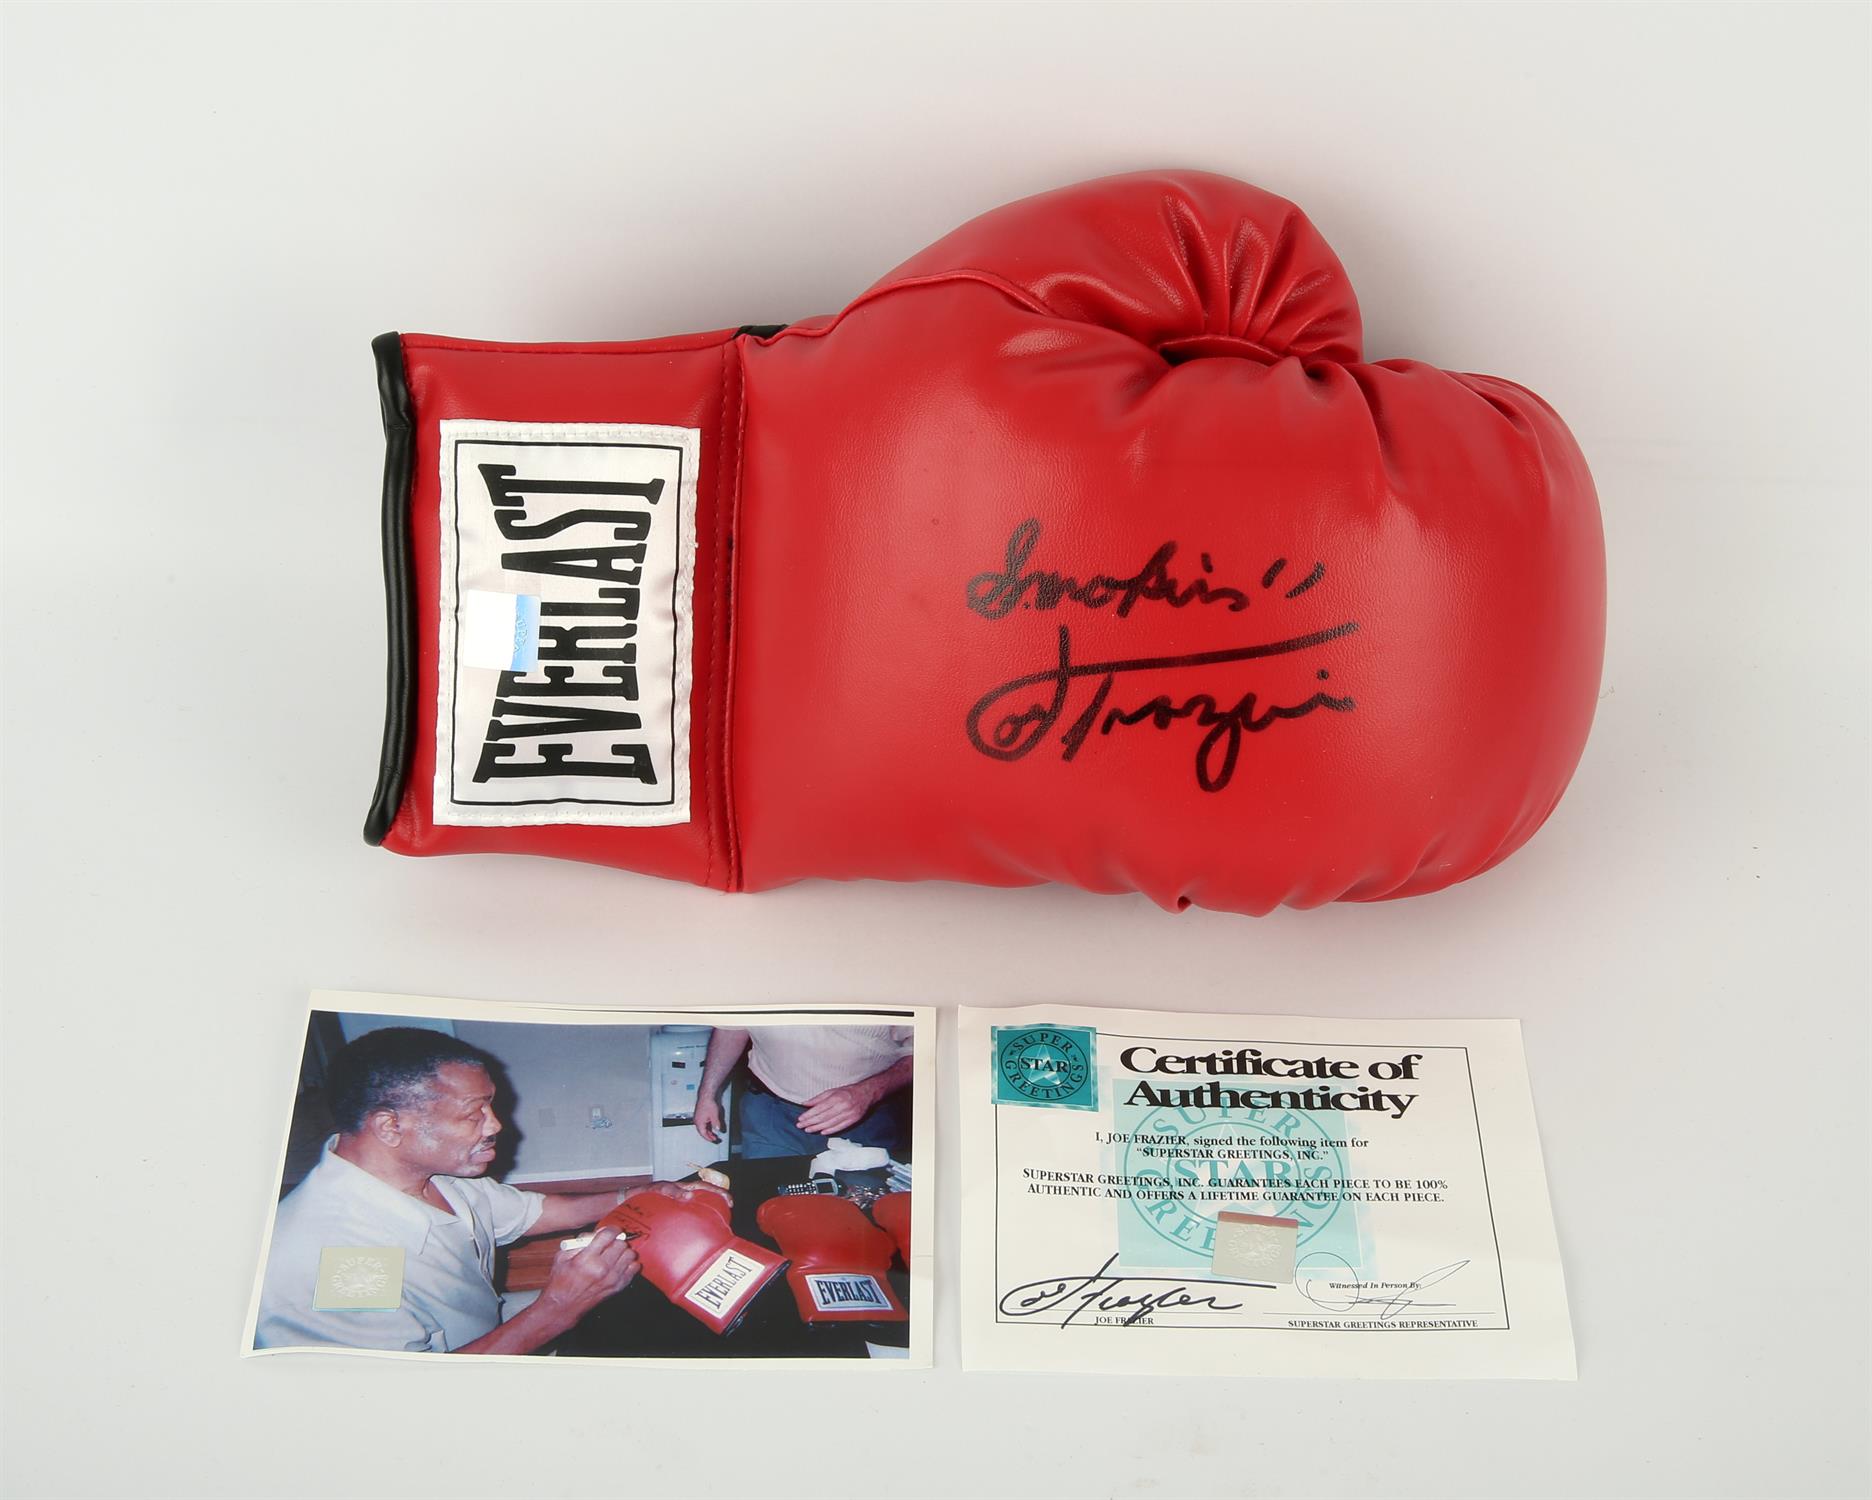 Joe Frazier - Signed Smokin' Everlast Boxing Glove, 10 oz, with Superstar Greetings Hologram and